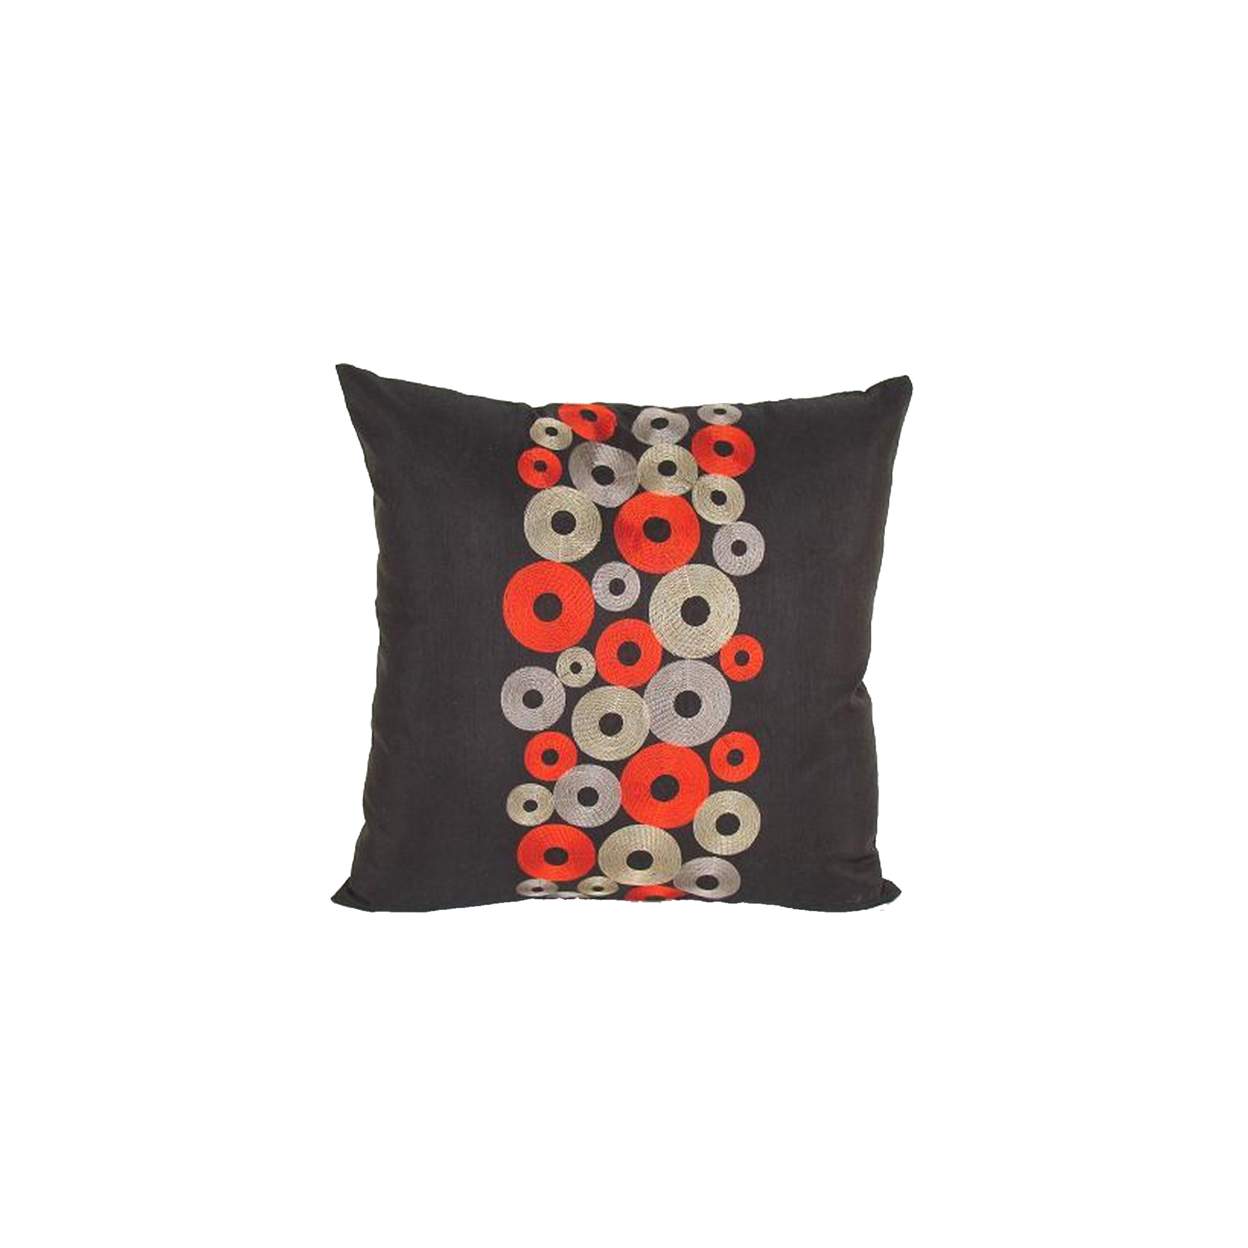 Square Fabric Pillow With Embroidered Circles, Black- Saltoro Sherpi